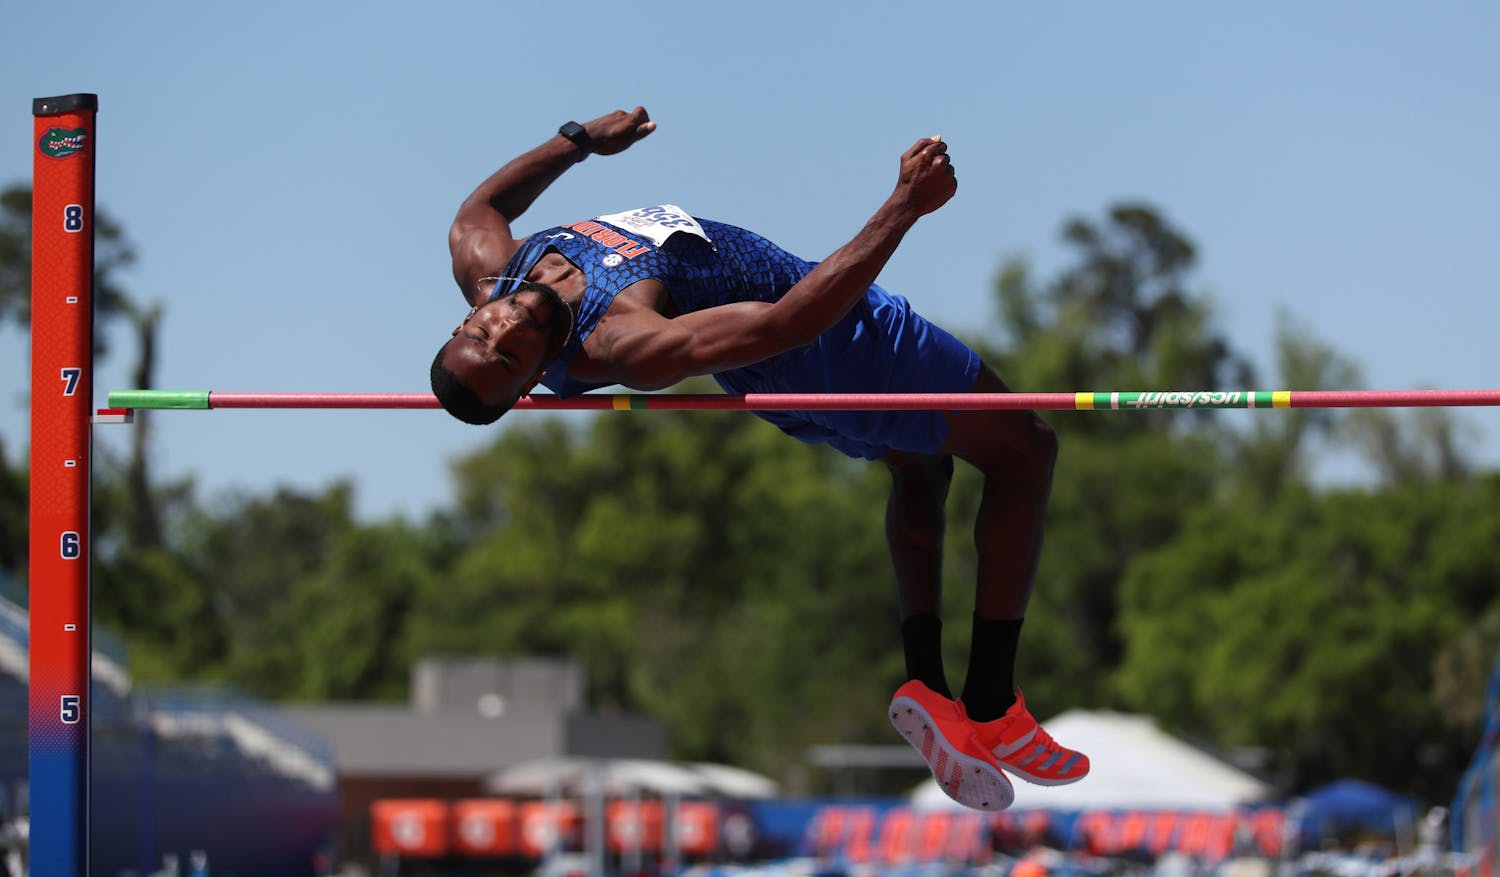 Clayton Brown vaults himself over the bar in the high jump during the Pepsi Florida Relays on Friday, April 2, 2021 at Percy Beard Track at James G. Pressly Stadium in Gainesville. The Gators participated in their first outdoor meet of the season last week. / UAA Communications photo by Courtney Culbreath